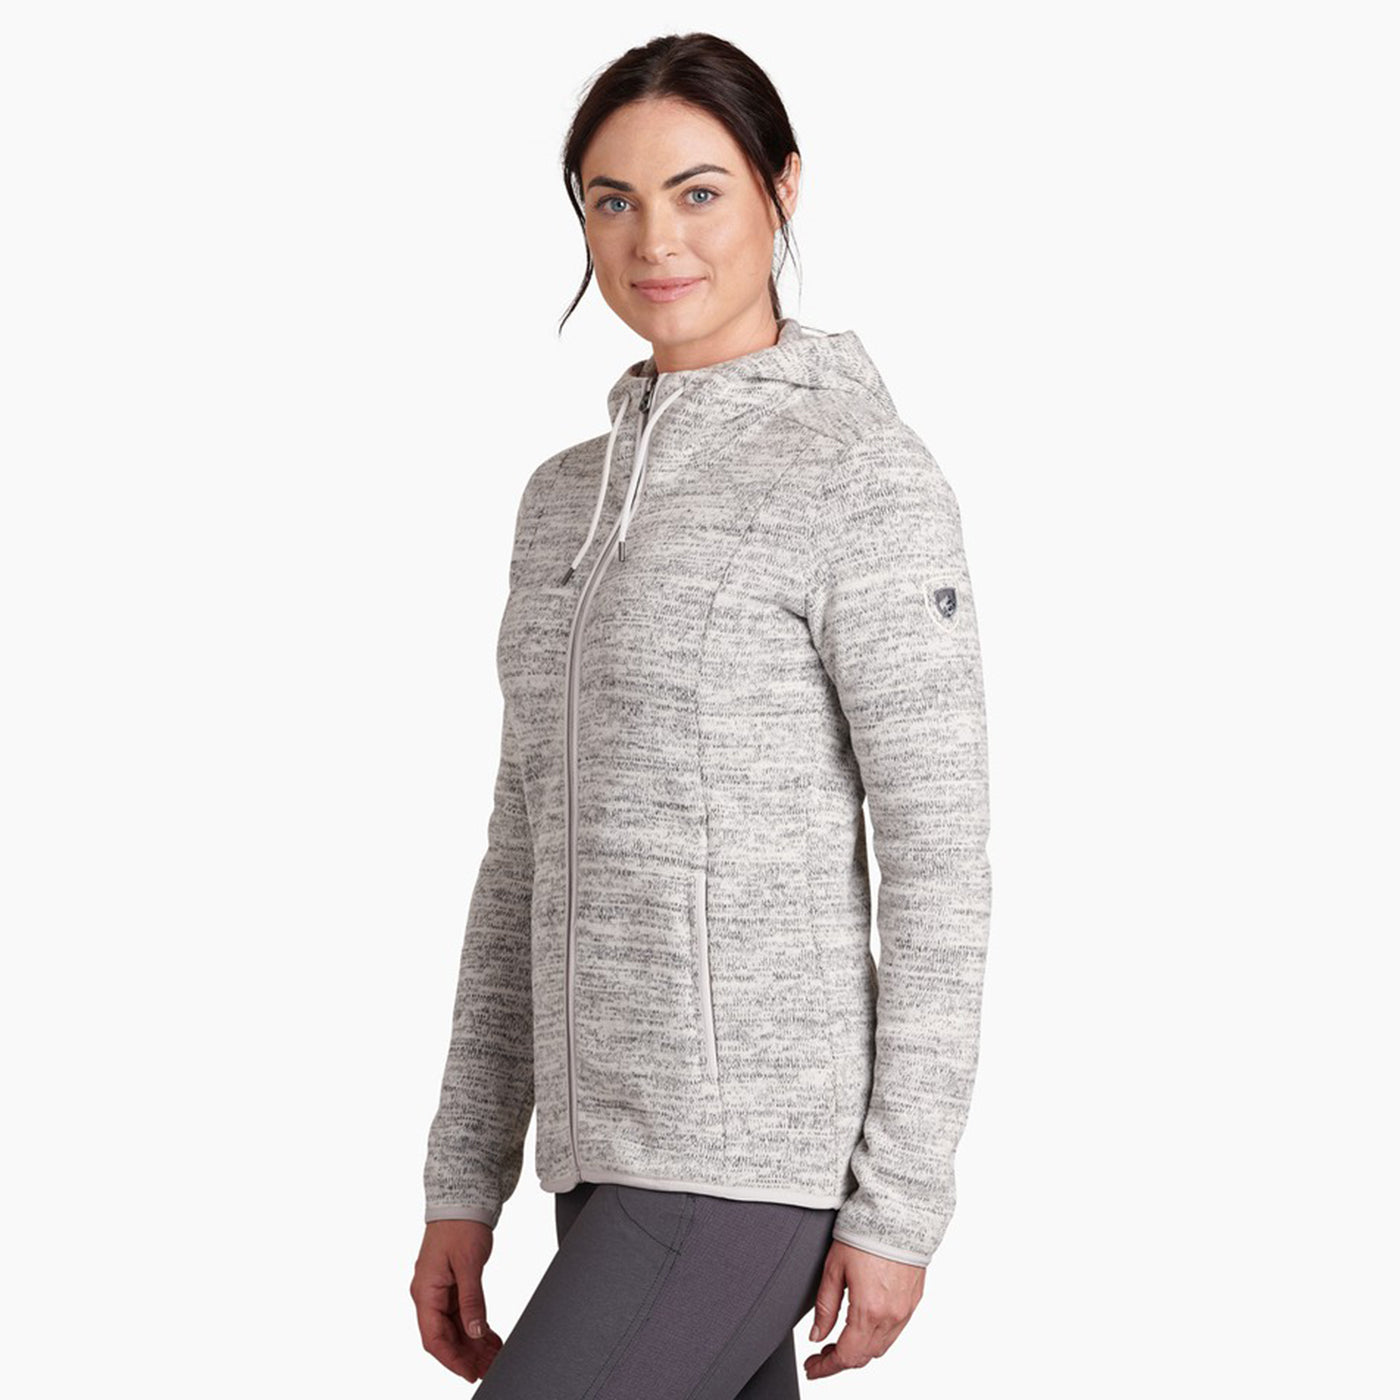 kuhl ascendyr hoody full zip womens on model three quarter view in color heather grey